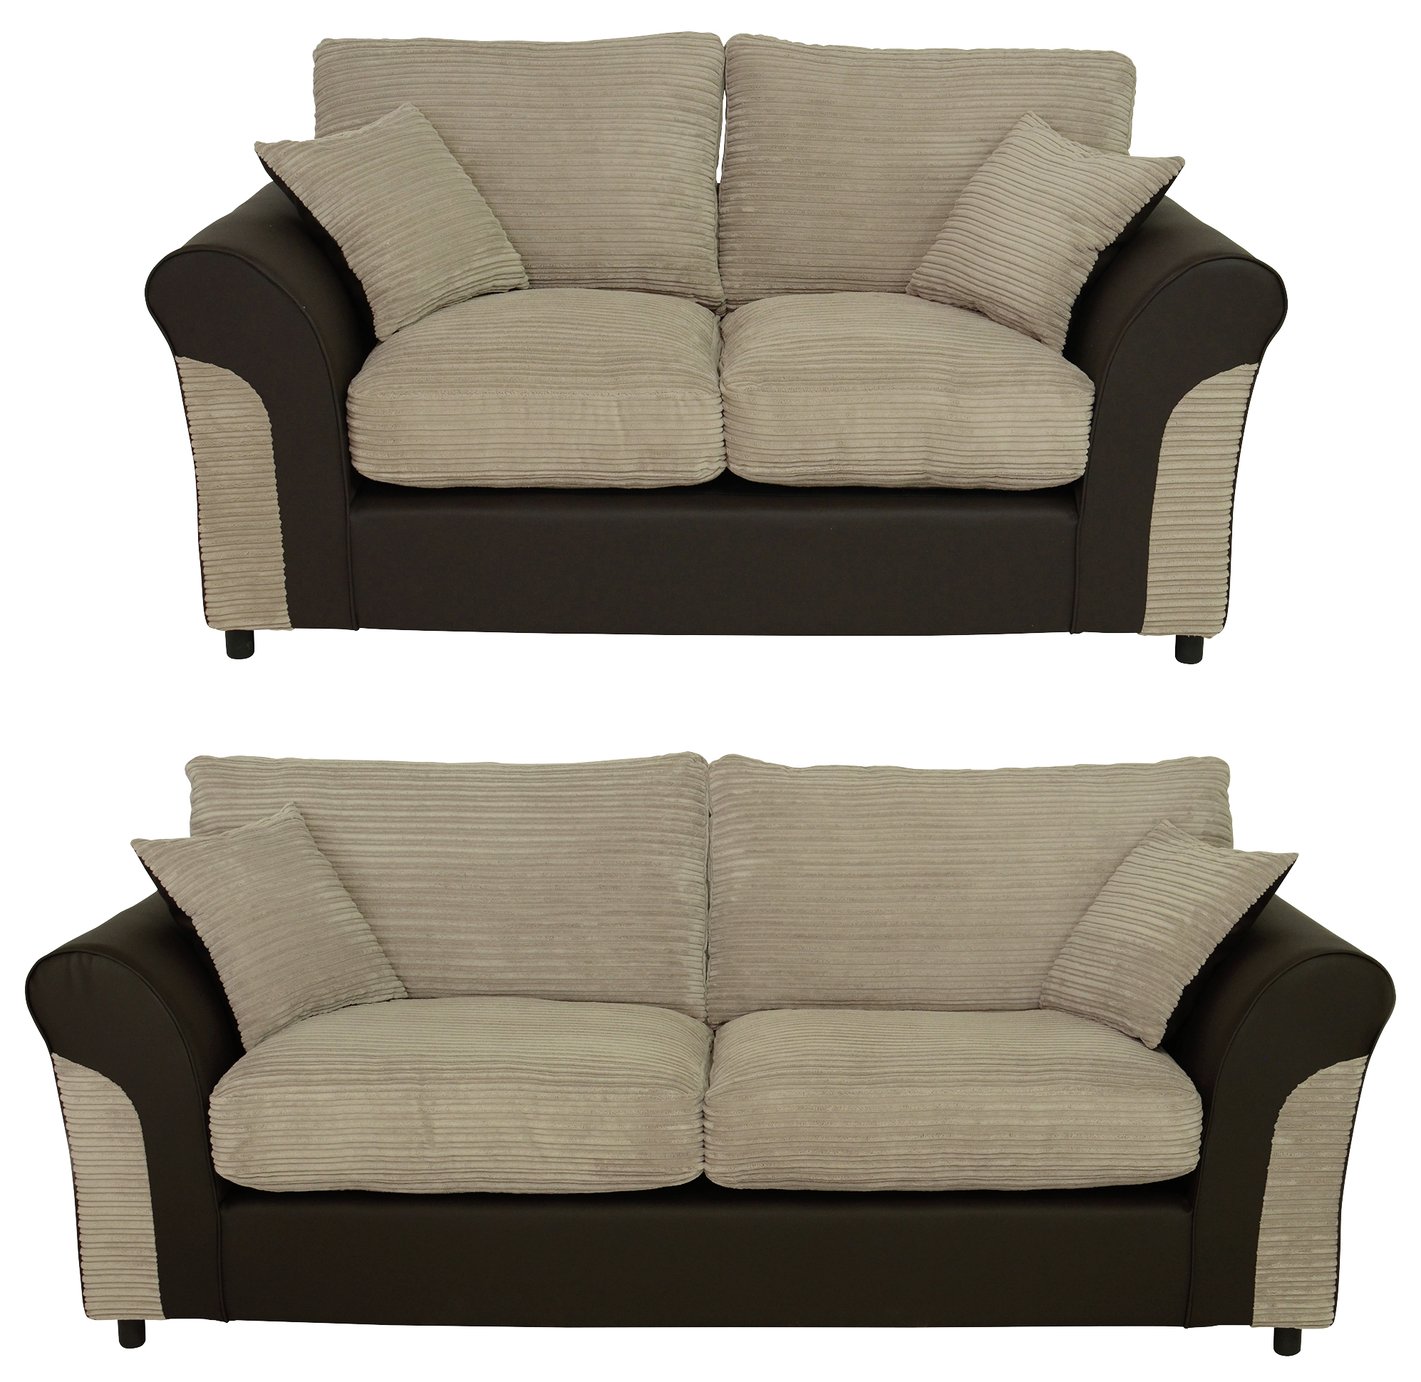 Argos Home Harry Fabric 2 Seater & 3 Seater Sofa - Natural